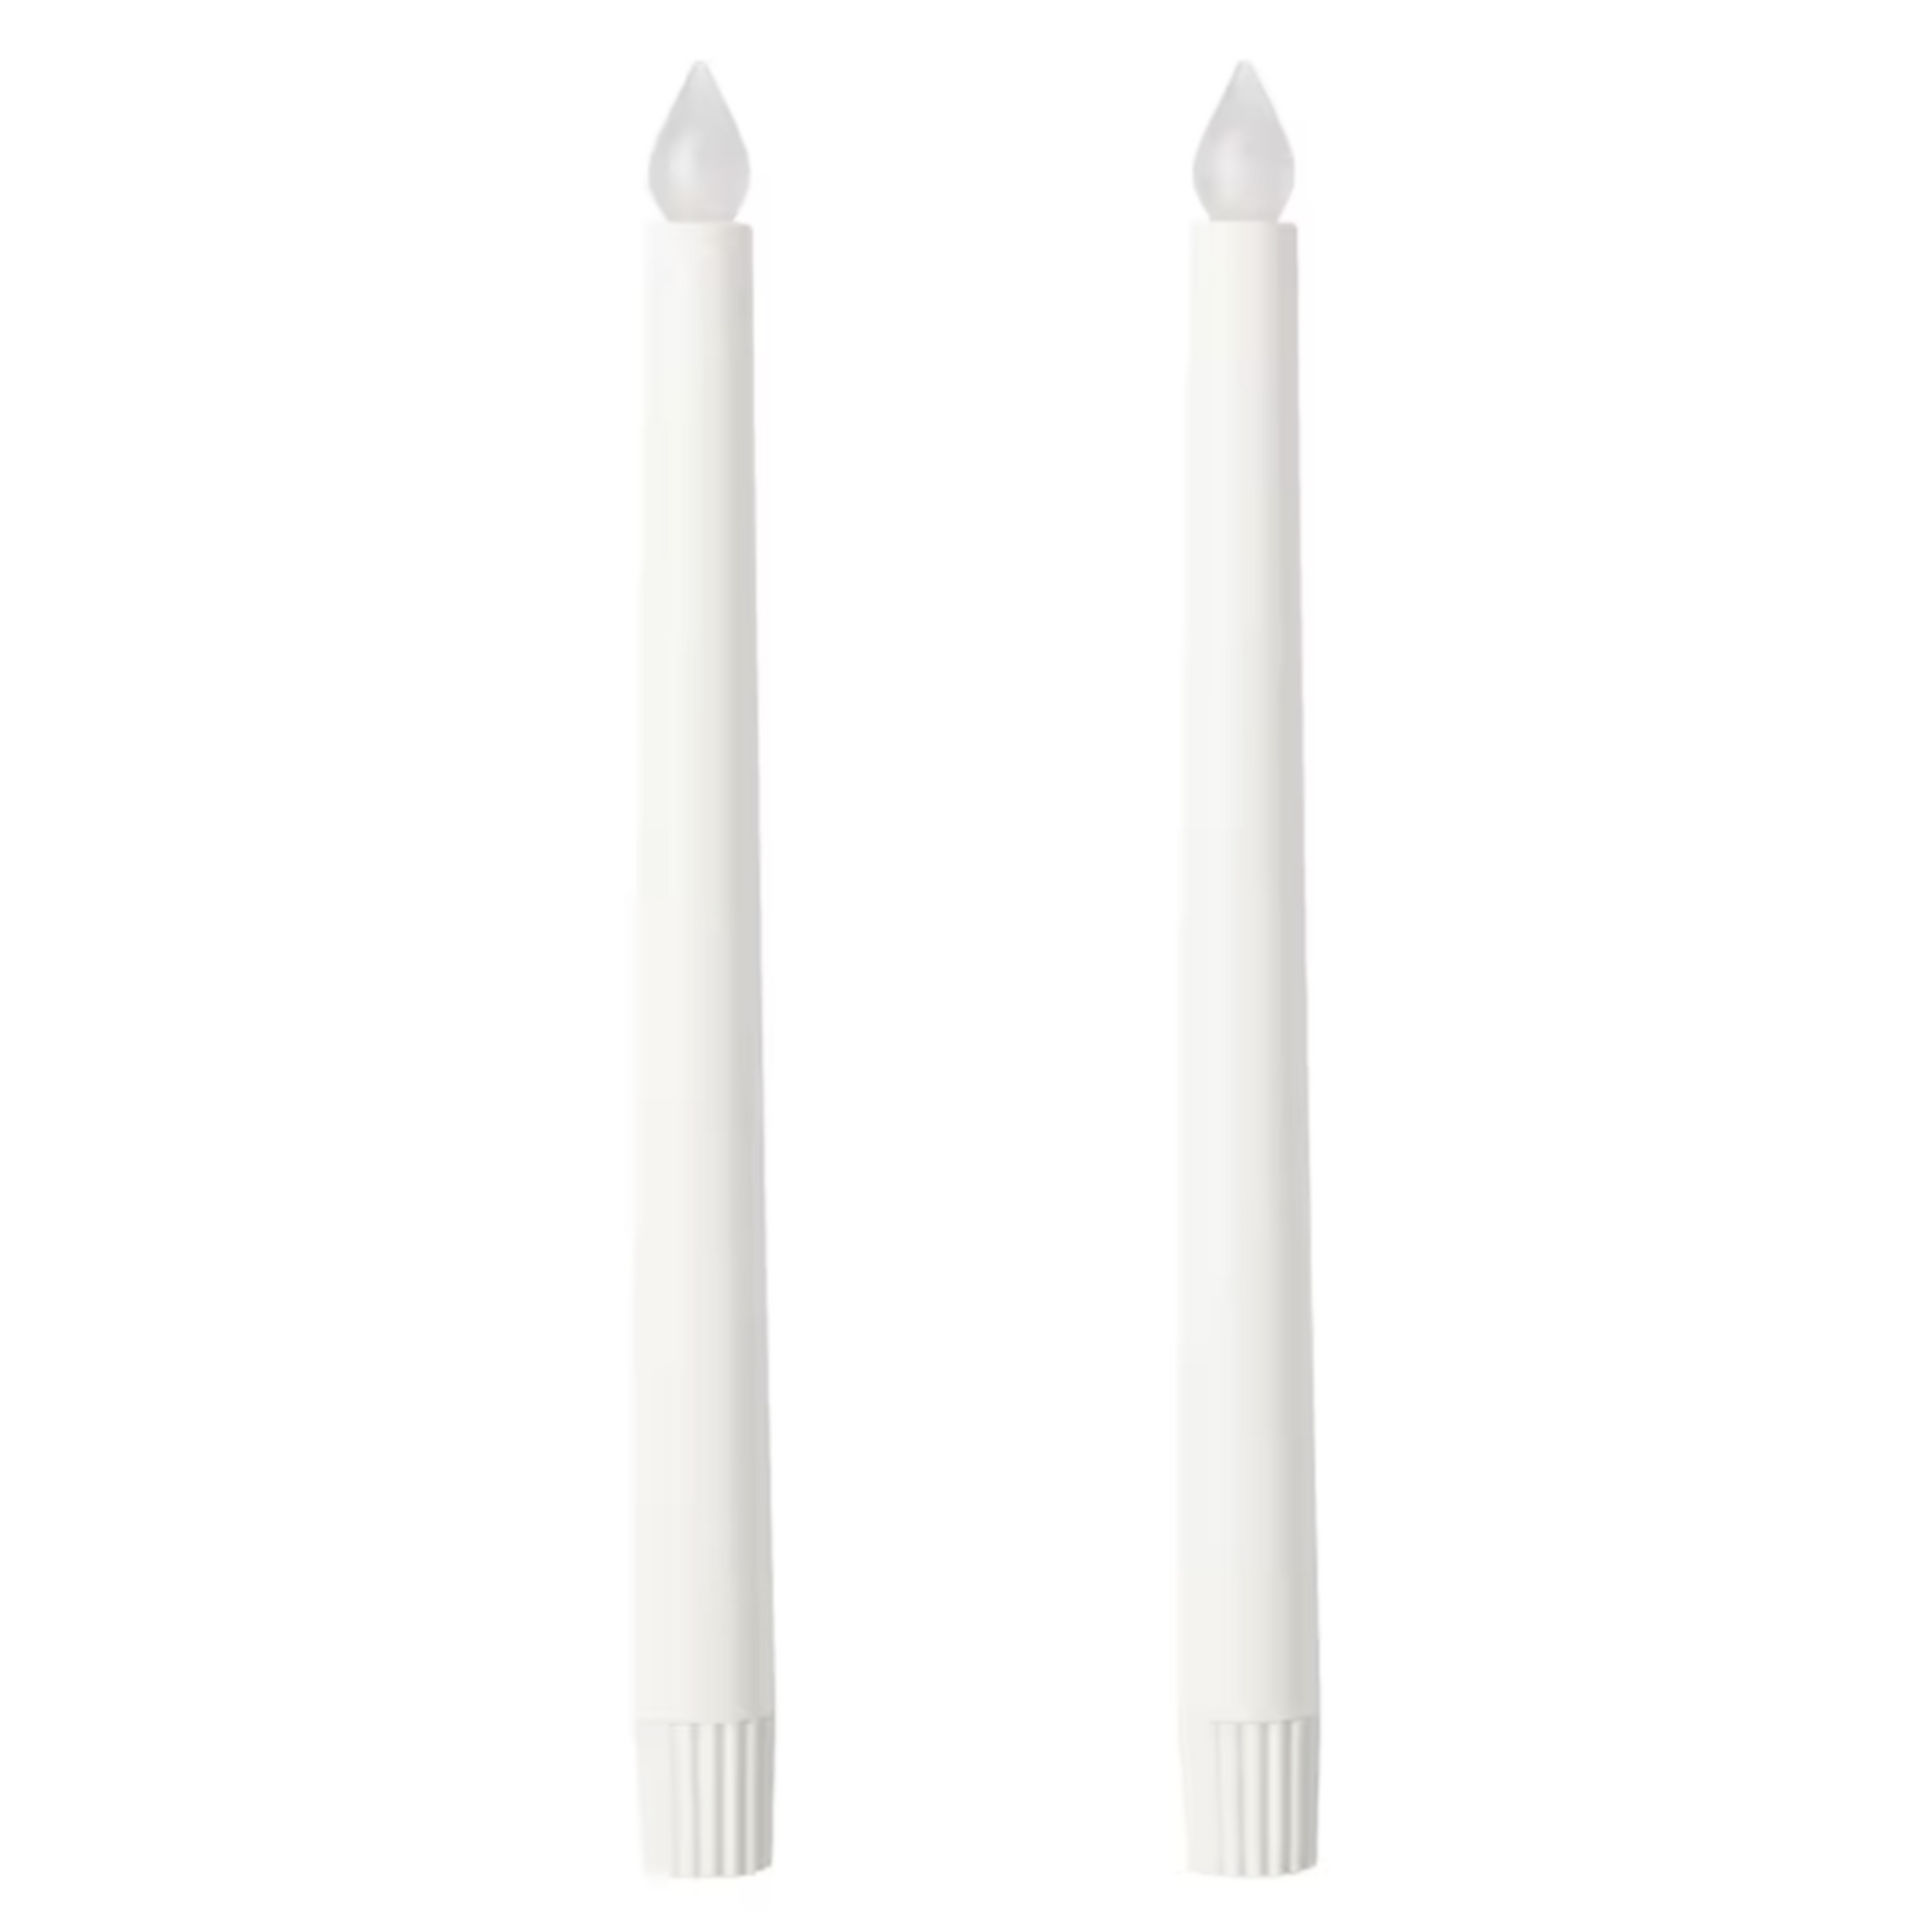 IKEA Adellovtrad LED Candle 2-Pack (8041197764895)